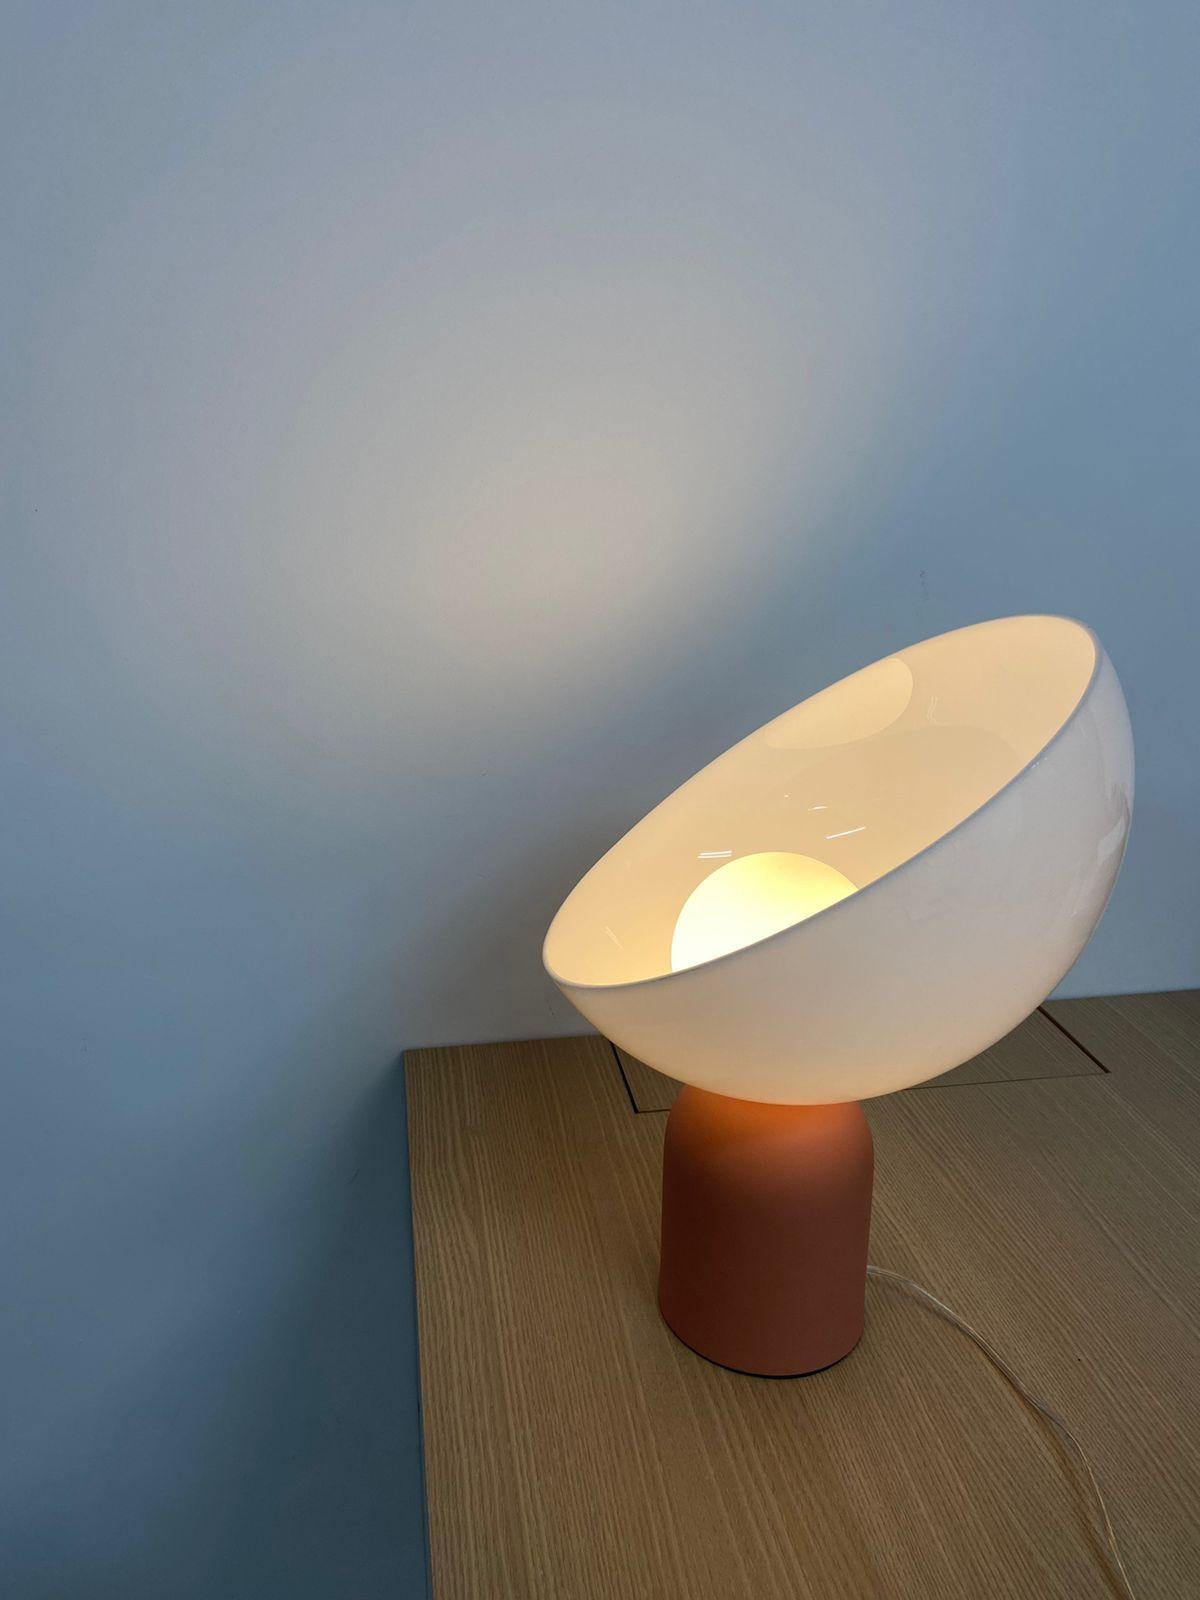 This table lamp is named Lichia. 
The product consists of a round acrylic diffuser and an aluminum base.
The base is in painted aluminum, and can be in any color from the palette posted in the photos (white, ivory, off-white pink, sand, avocado